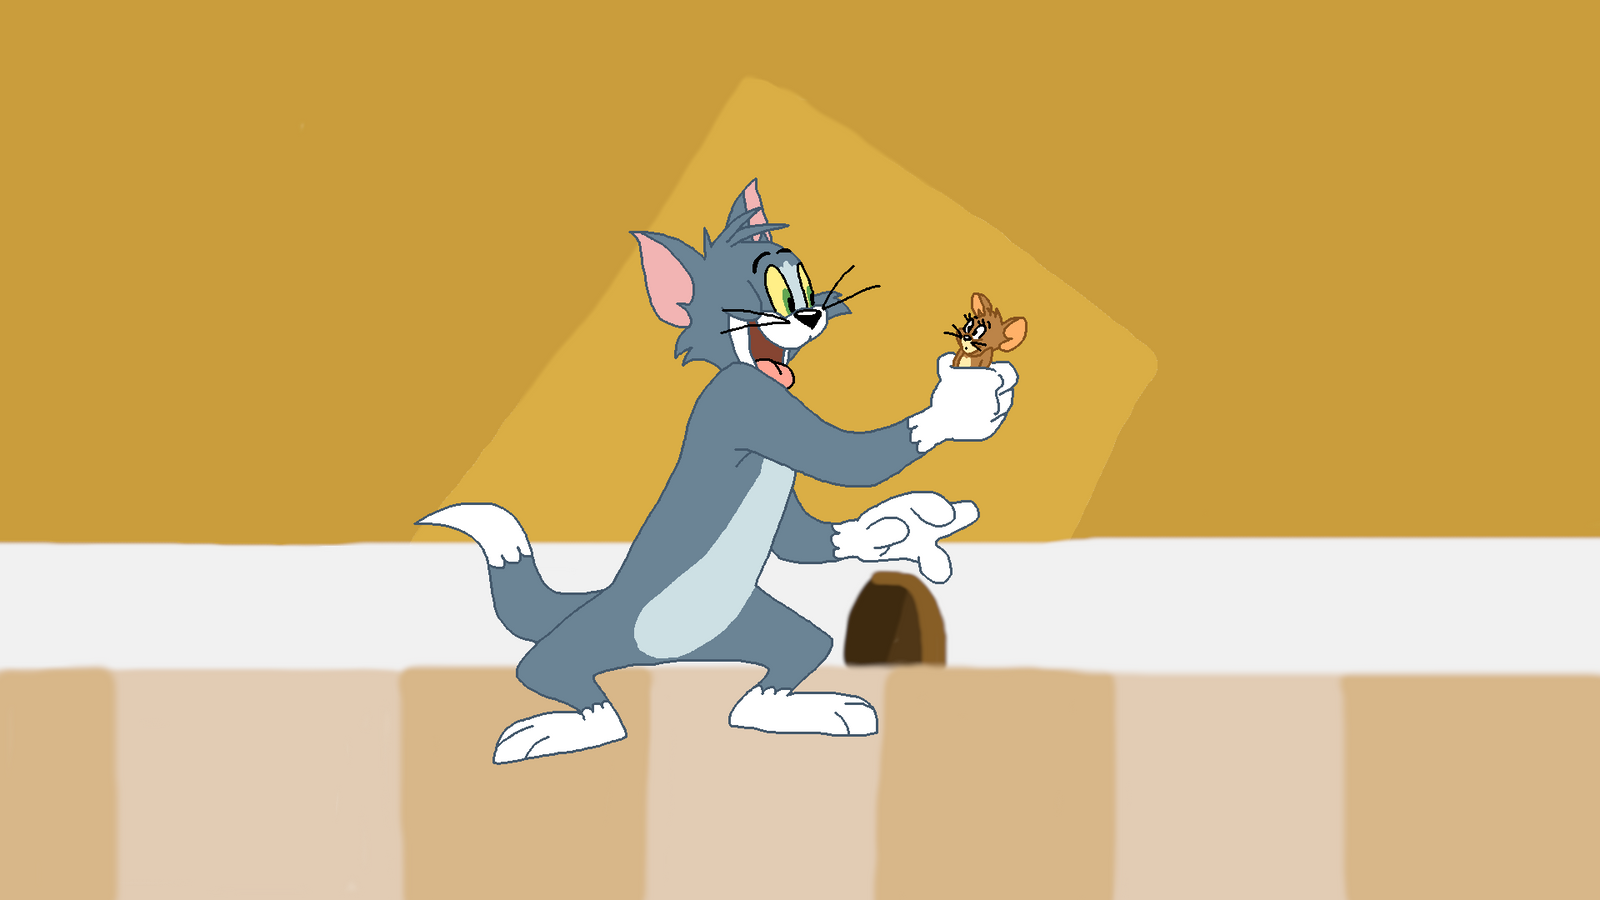 The Tom and Jerry Show (2014) (My Style) by SmashGamer16 on DeviantArt